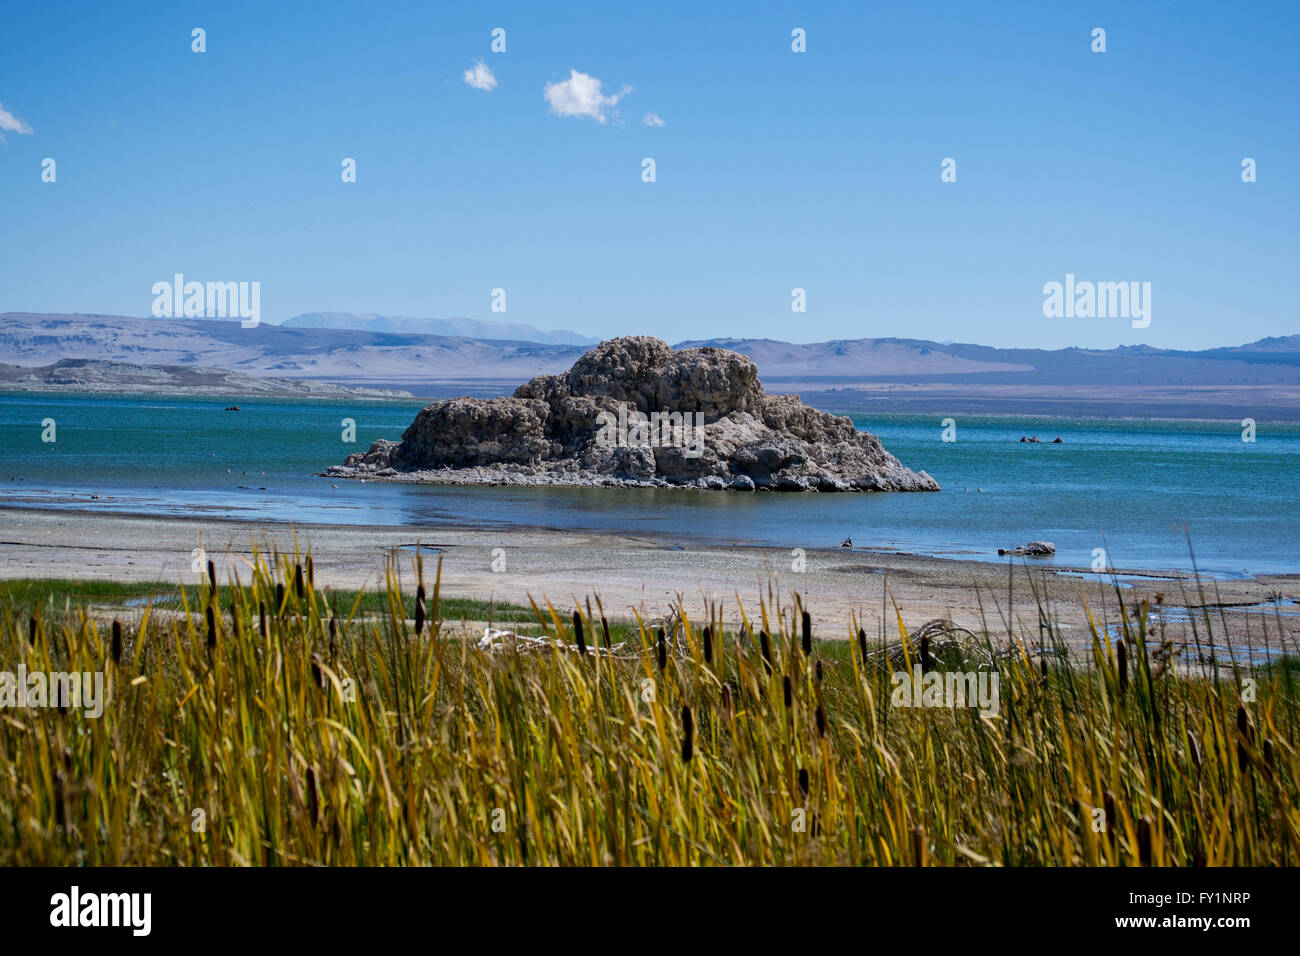 Mono Lake, a large shallow saline lake with limestone formations on a fall day at the base of Sierra Nevada mountains. Stock Photo